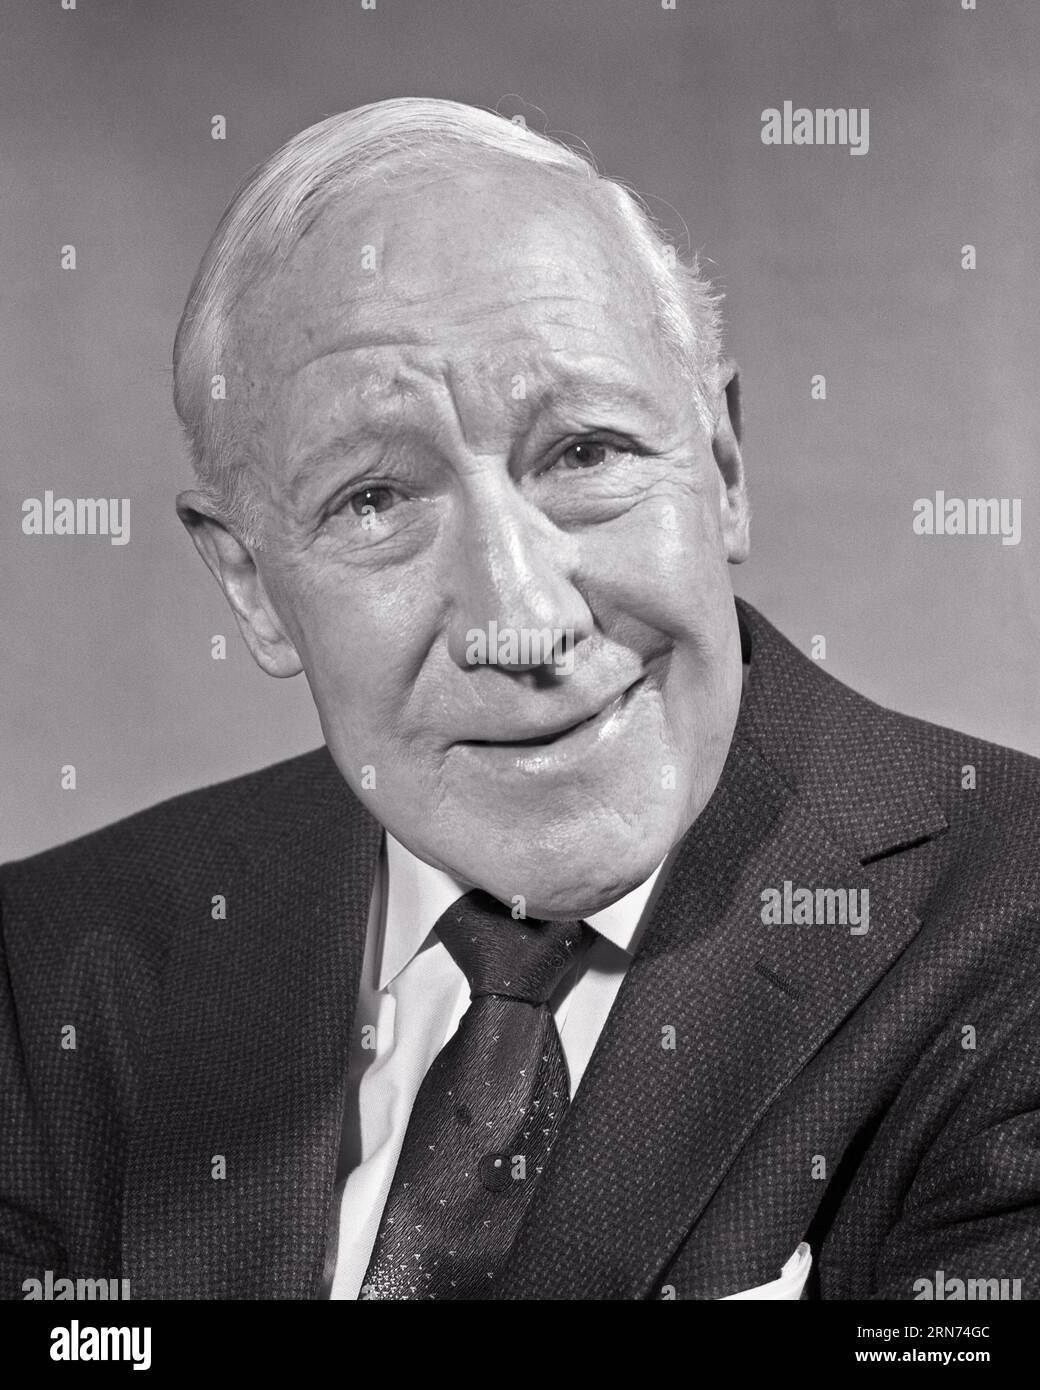 1950s PORTRAIT OF SENIOR MAN WEARING SUIT AND TIE SMILING LOOKING AT CAMERA  - p1598 HAR001 HARS OLDSTERS HEAD AND SHOULDERS CHEERFUL OLDSTER AND SMILES ELDERS FRIENDLY JOYFUL STYLISH ELDERLY MAN BLACK AND WHITE CAUCASIAN ETHNICITY HAR001 OLD FASHIONED Stock Photo